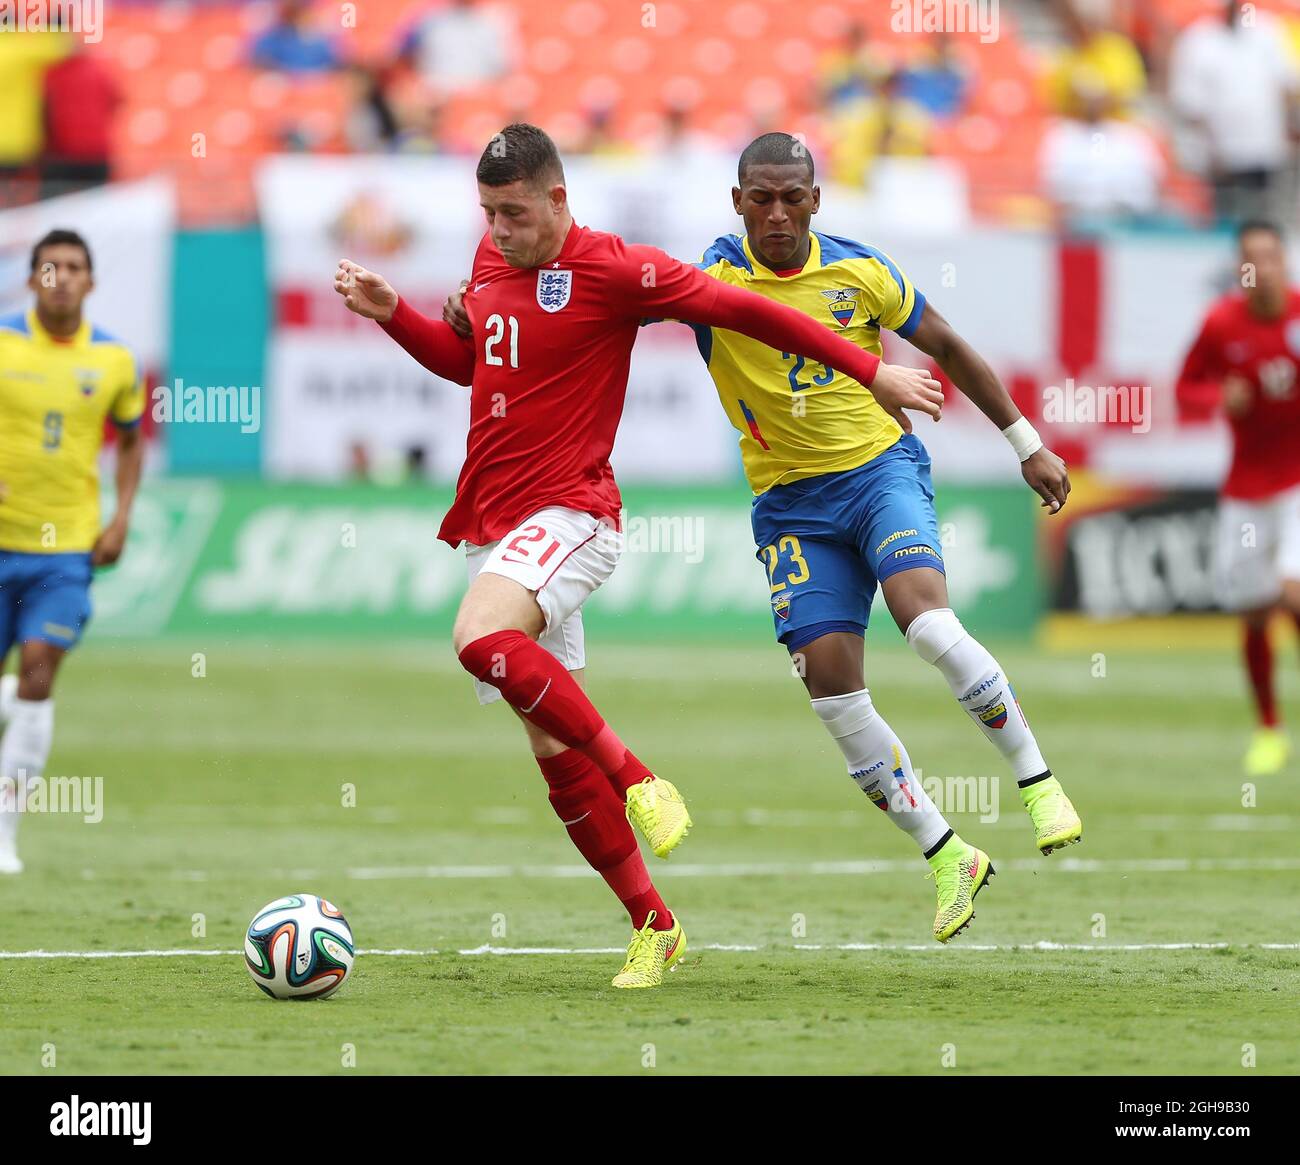 England's Ross Barkley tussles with Ecuador's Christian Noboa during the International Friendly match between England and Ecuador held at Sun Life Stadium in Miami, USA on June 4, 2014. Pic David Klein/Sportimage. Stock Photo